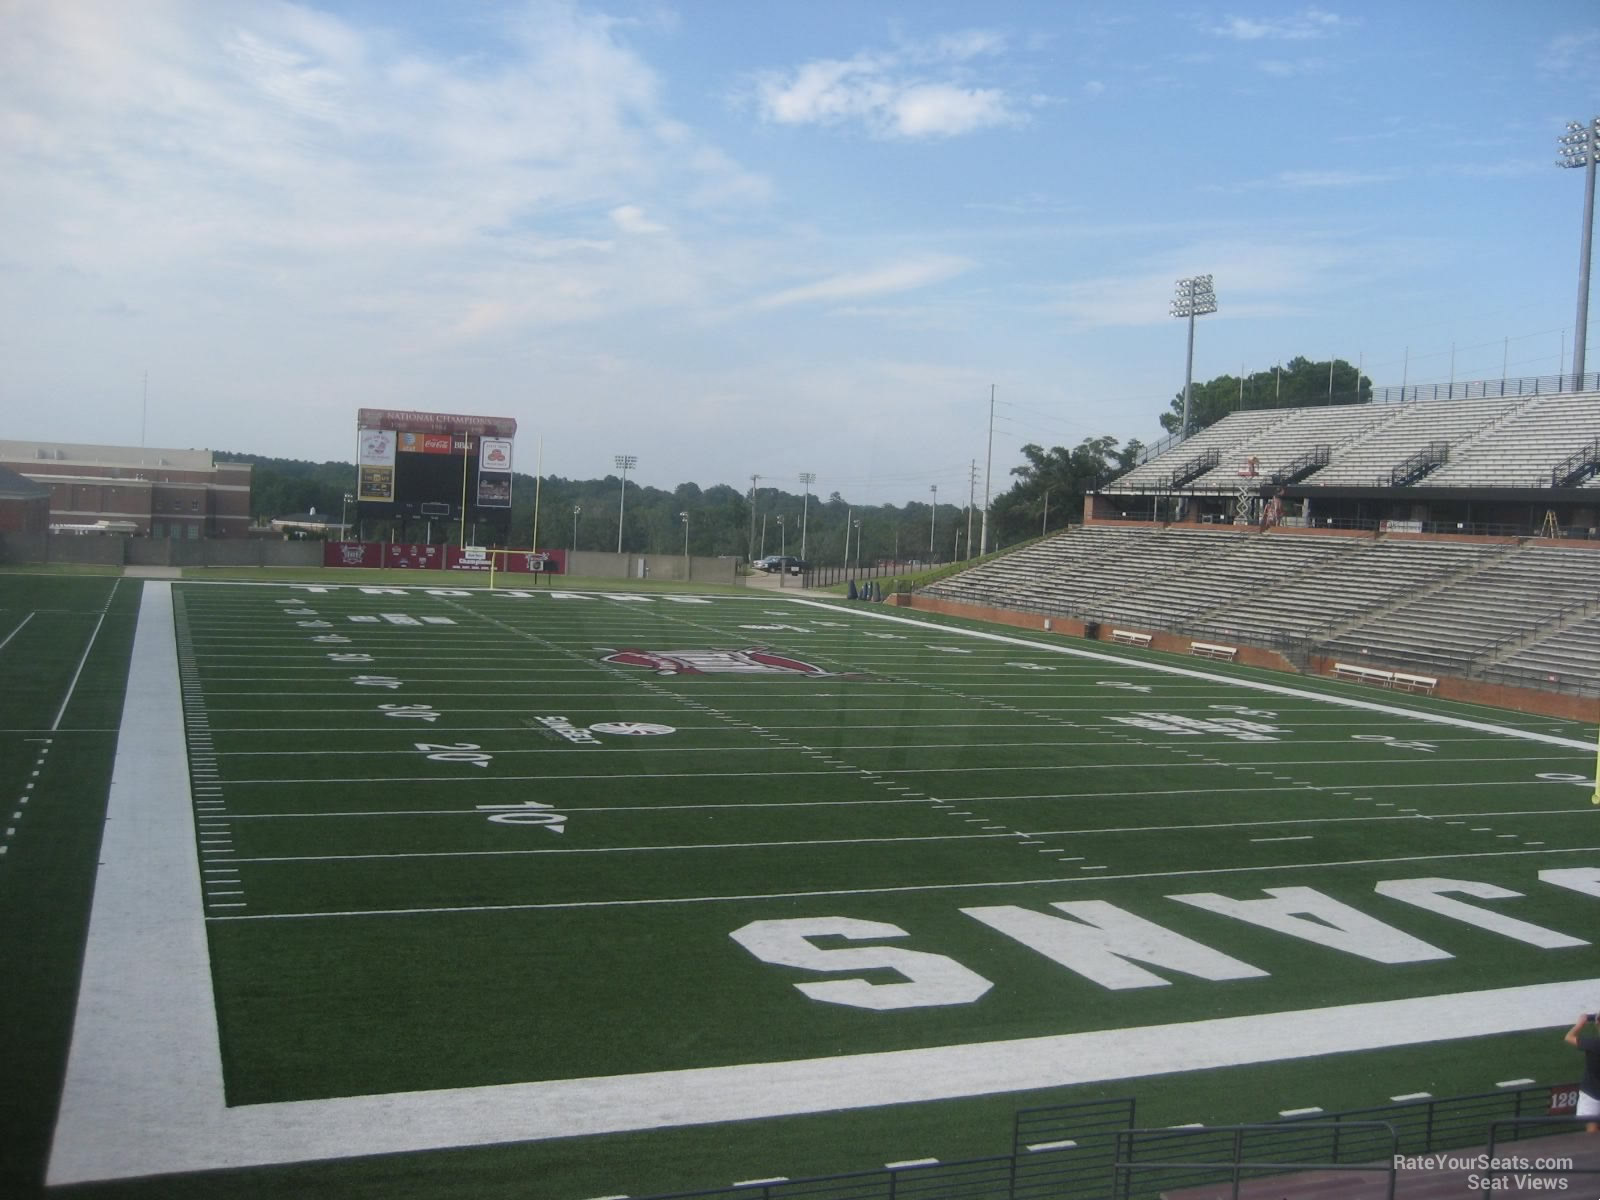 section 126, row 15 seat view  - troy memorial stadium